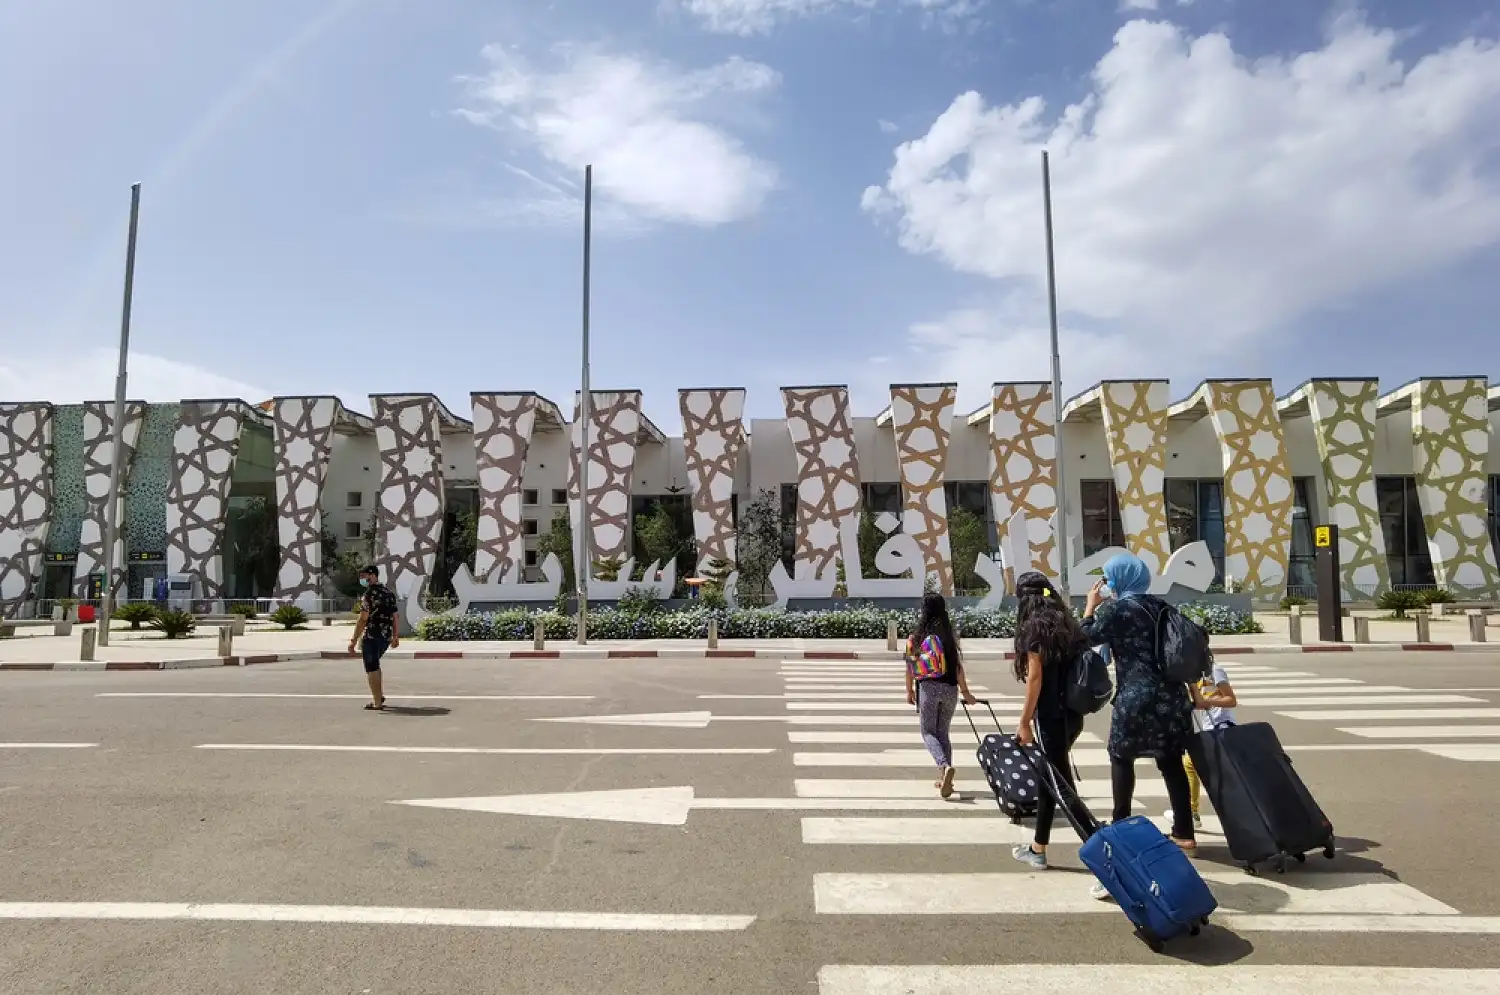 Day 7:Fez – Airport